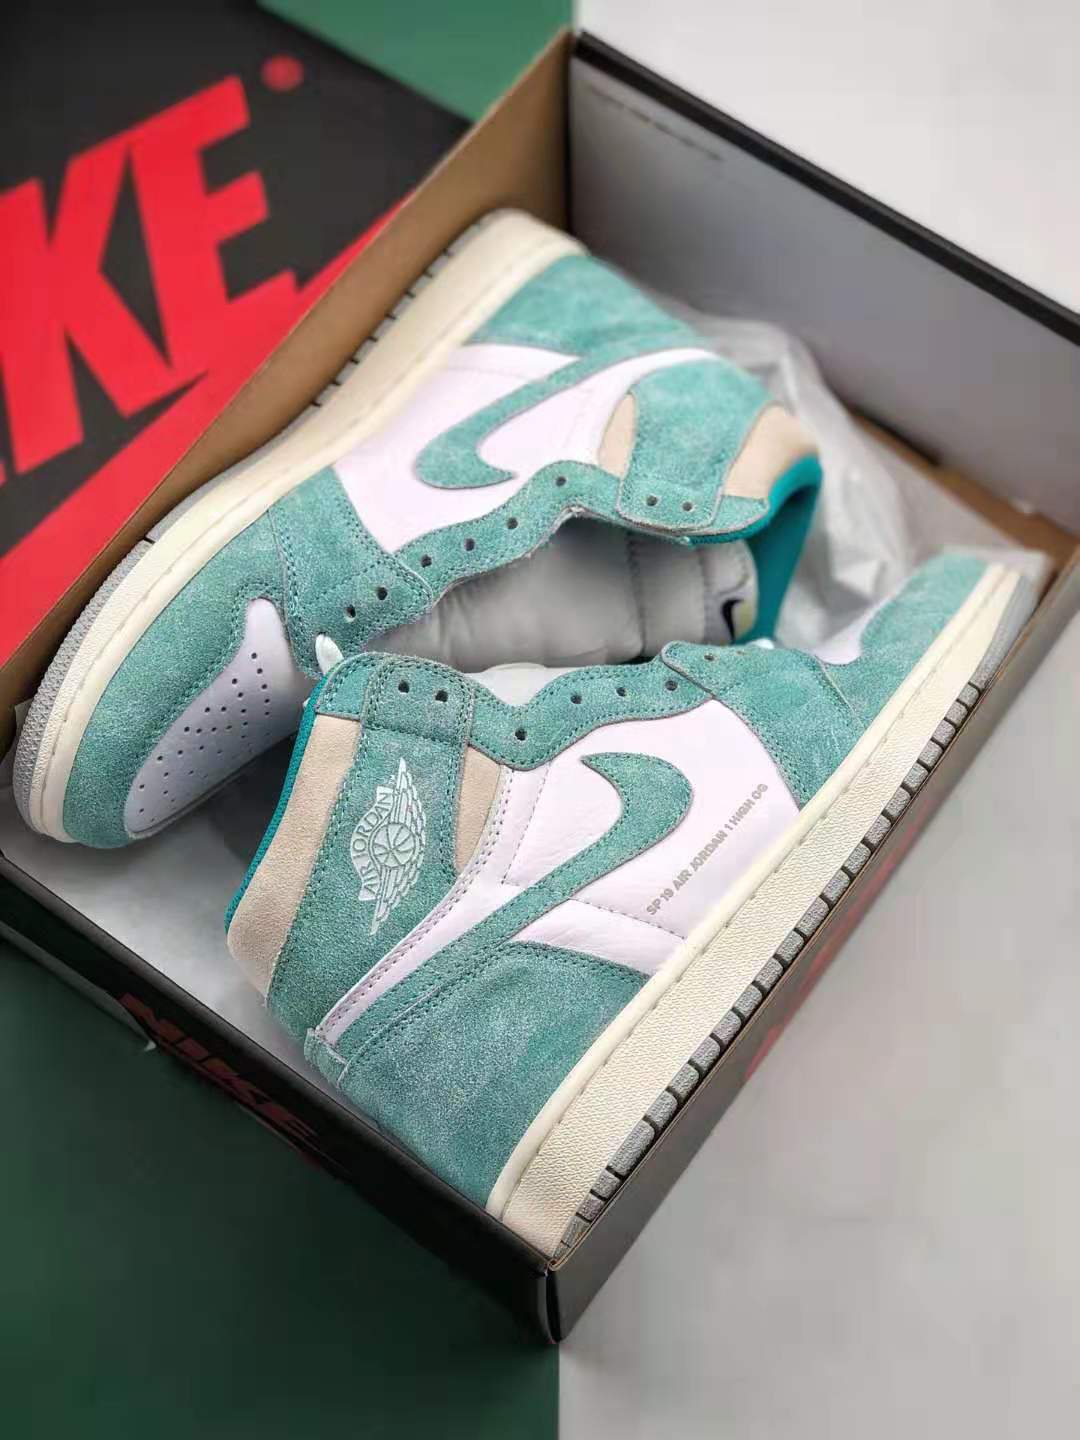 Air Jordan 1 Retro High OG Turbo Green 555088-311 - Limited Edition Sneakers Available Online